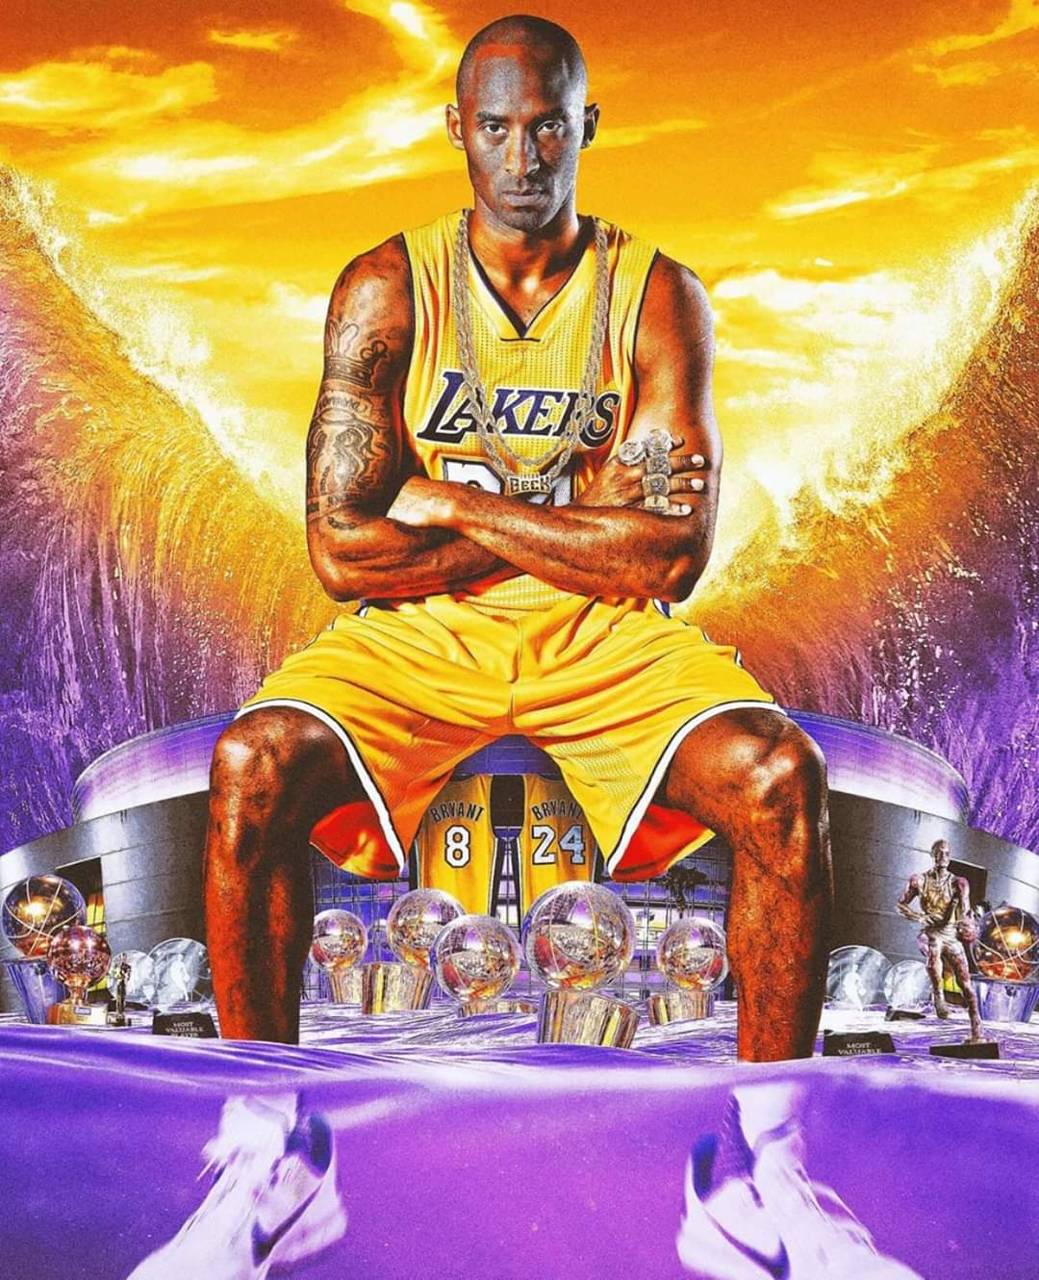 Kobe Bryant in Lakers jersey sitting on a throne with his 5 championship rings - Kobe Bryant